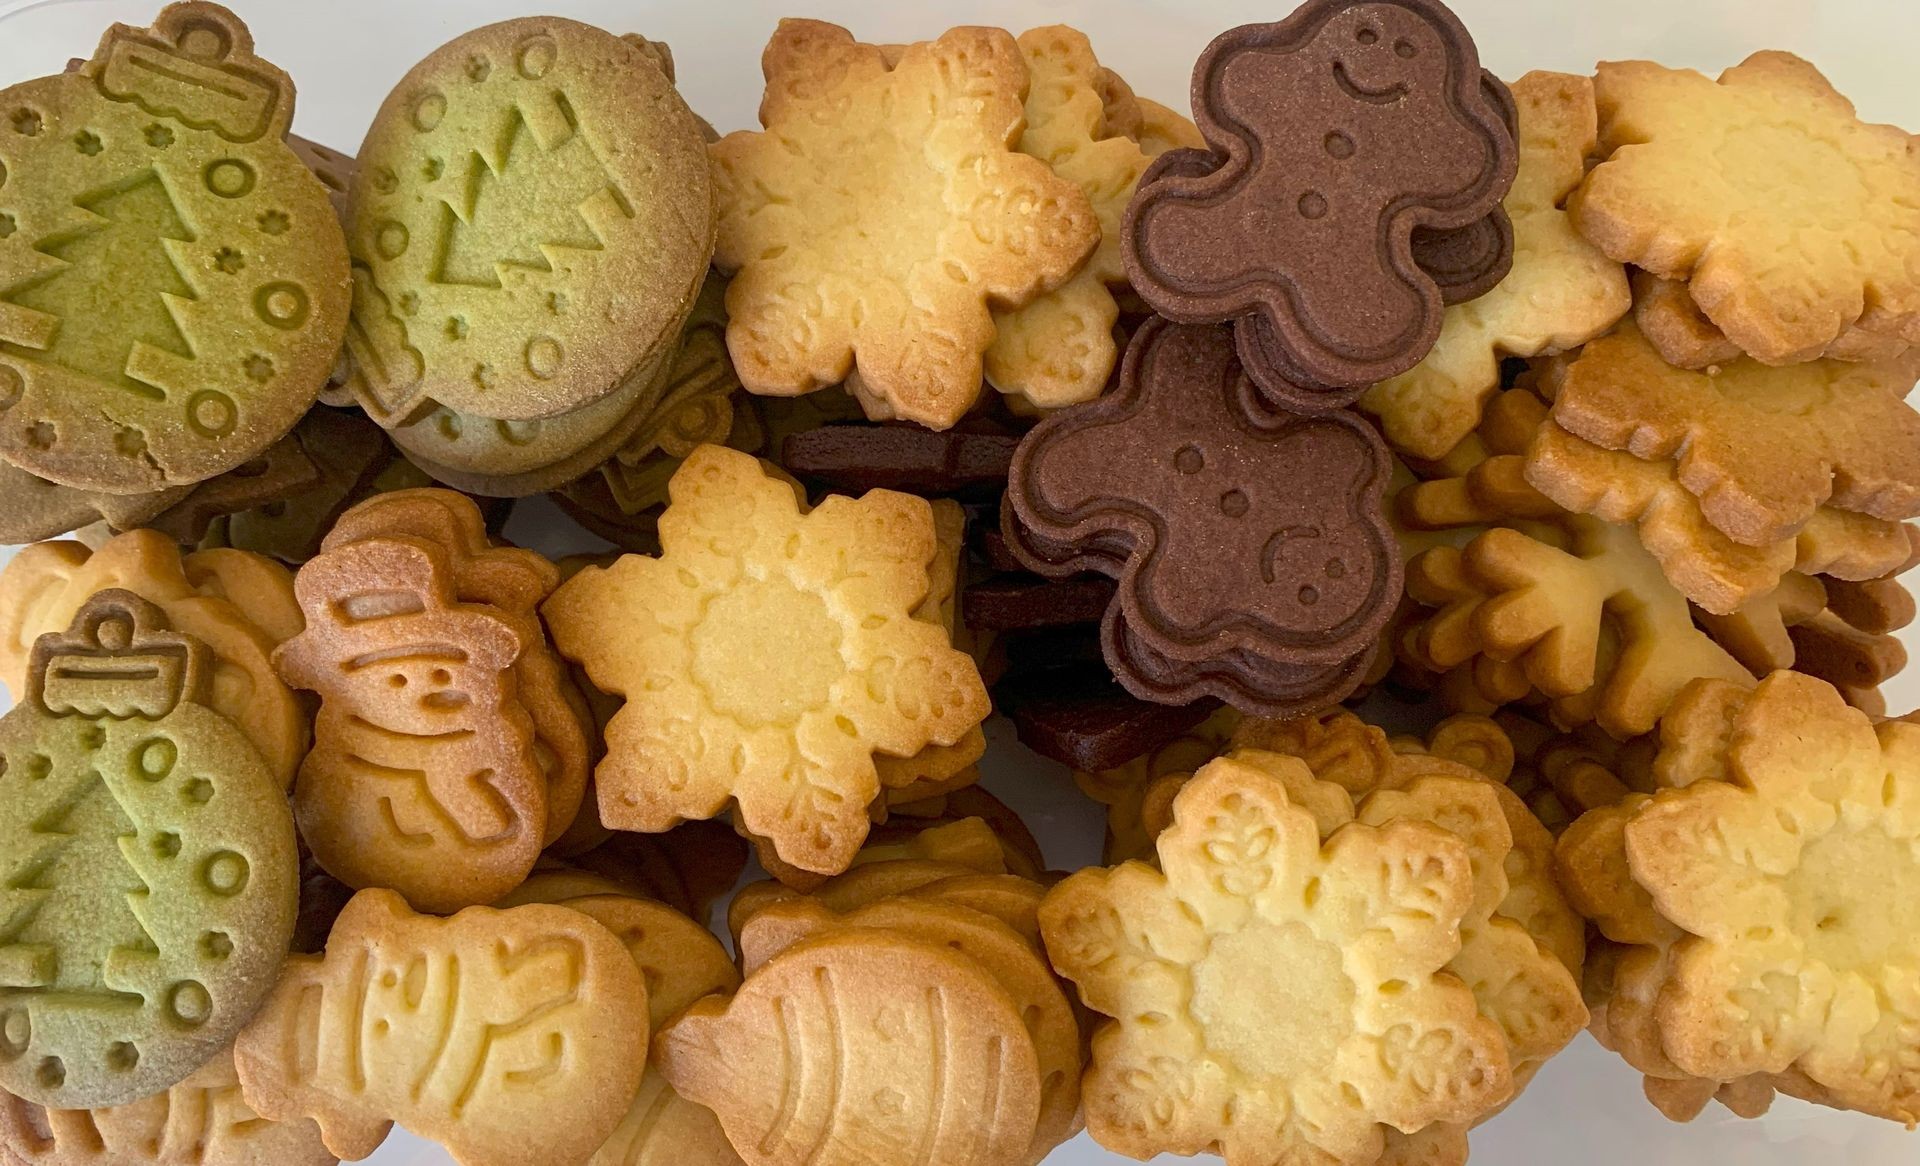 Festival-style Cookies